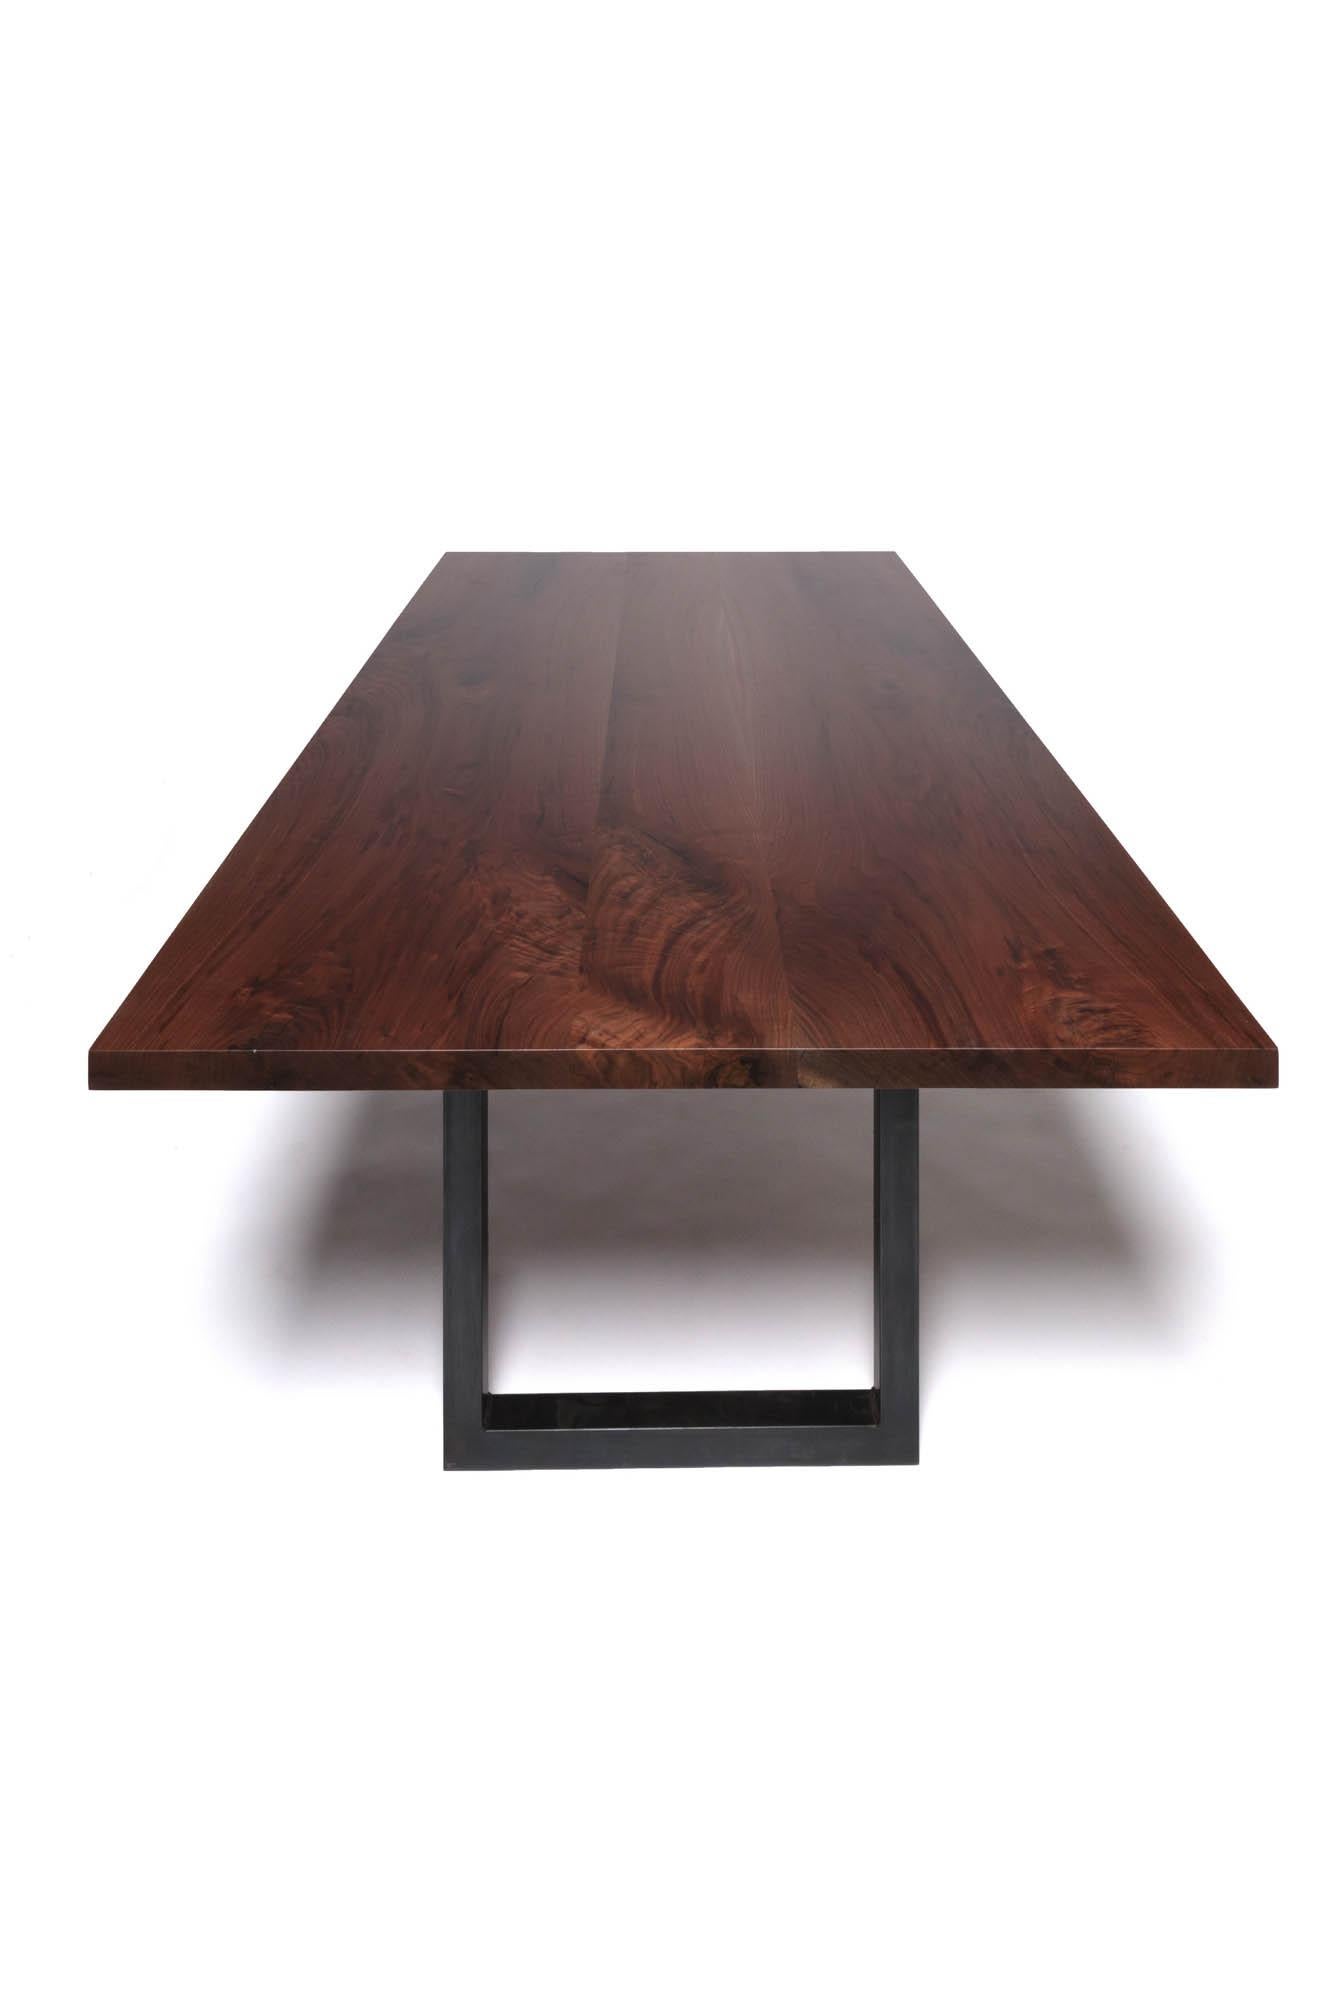 American Solid Walnut Table on Modern Black Patina Steel Base by Alabama Sawyer For Sale